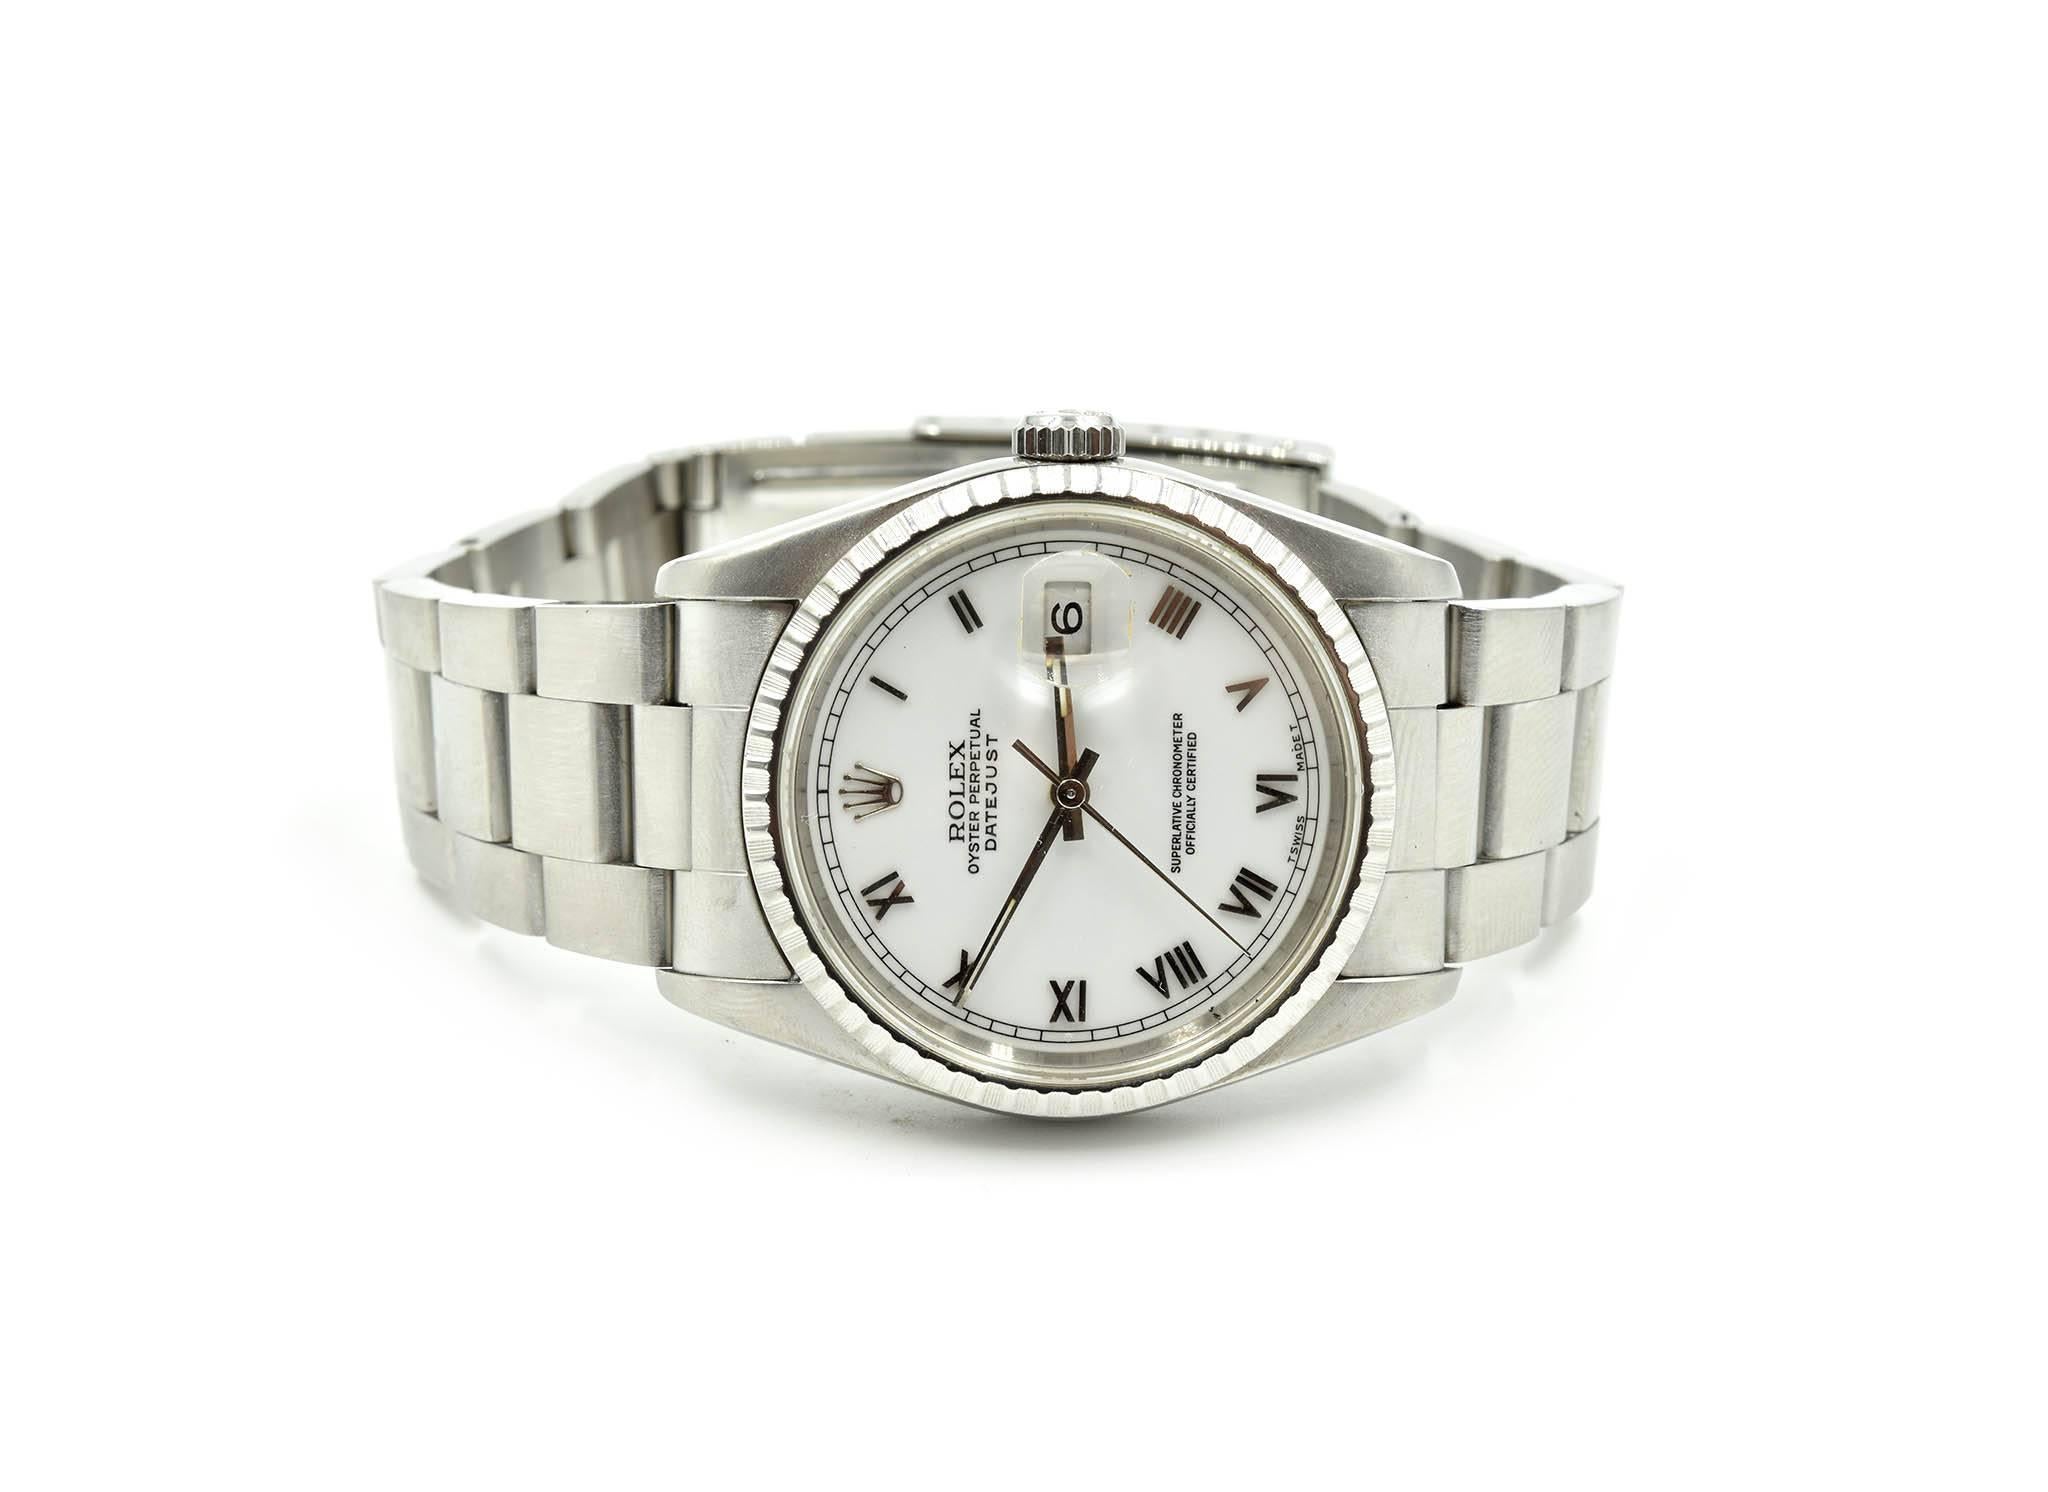 Contemporary Rolex Stainless Steel Datejust White Roman Dial automatic Wristwatch Ref 16220